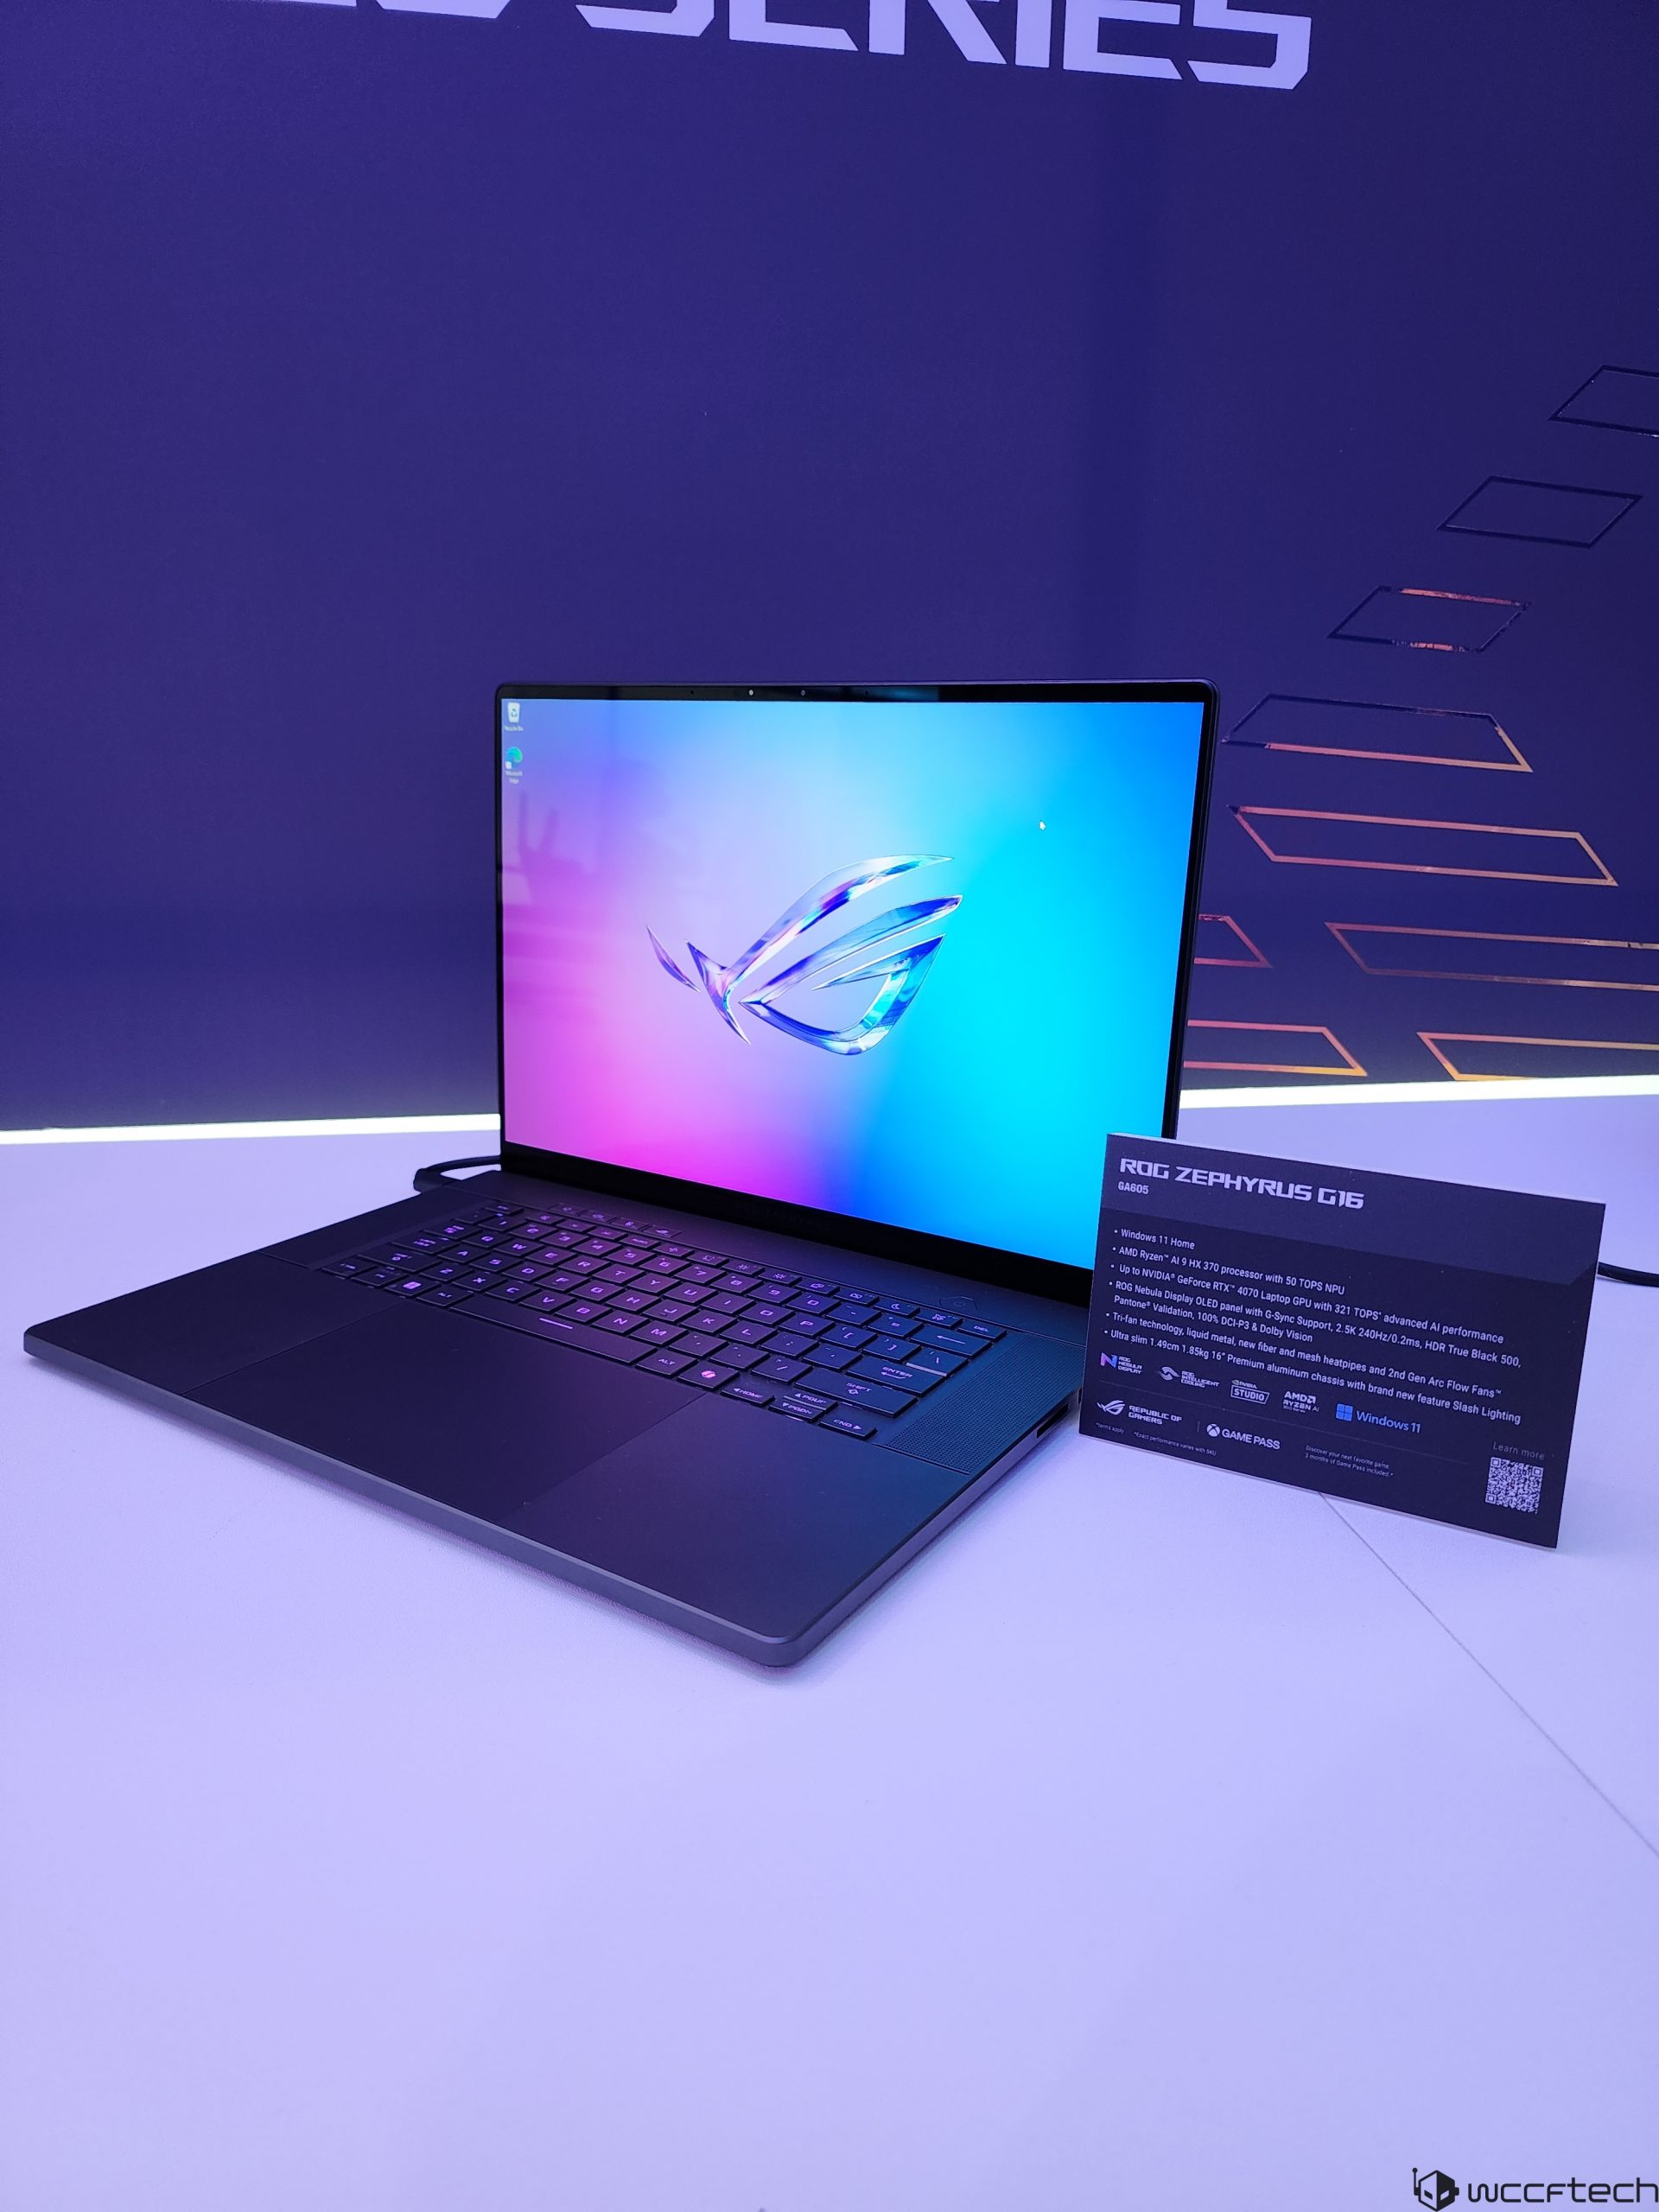 ASUS Intros Next-Gen ROG, ProArt, Zenbook, Vivobook Laptops With AMD Ryzen AI 300 CPUs, Up To 32% Faster At Same TDP As Last-Gen 1